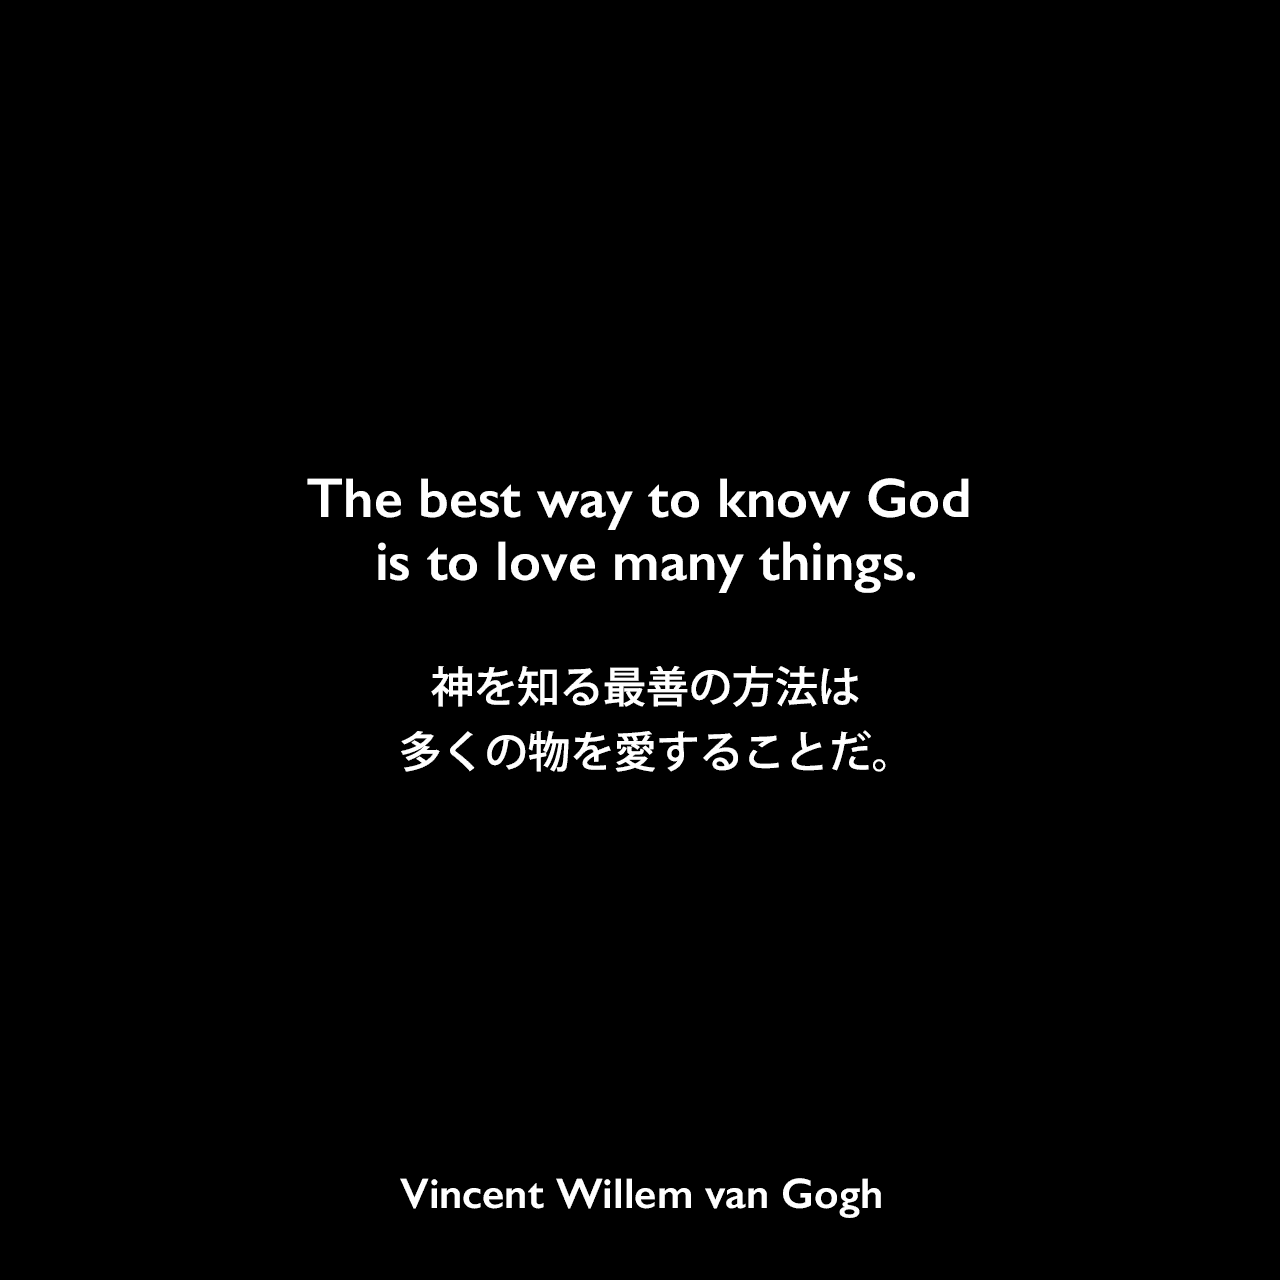 The best way to know God is to love many things.神を知る最善の方法は、多くの物を愛することだ。- ゴッホの弟テオへ宛てた手紙よりVincent Willem van Gogh